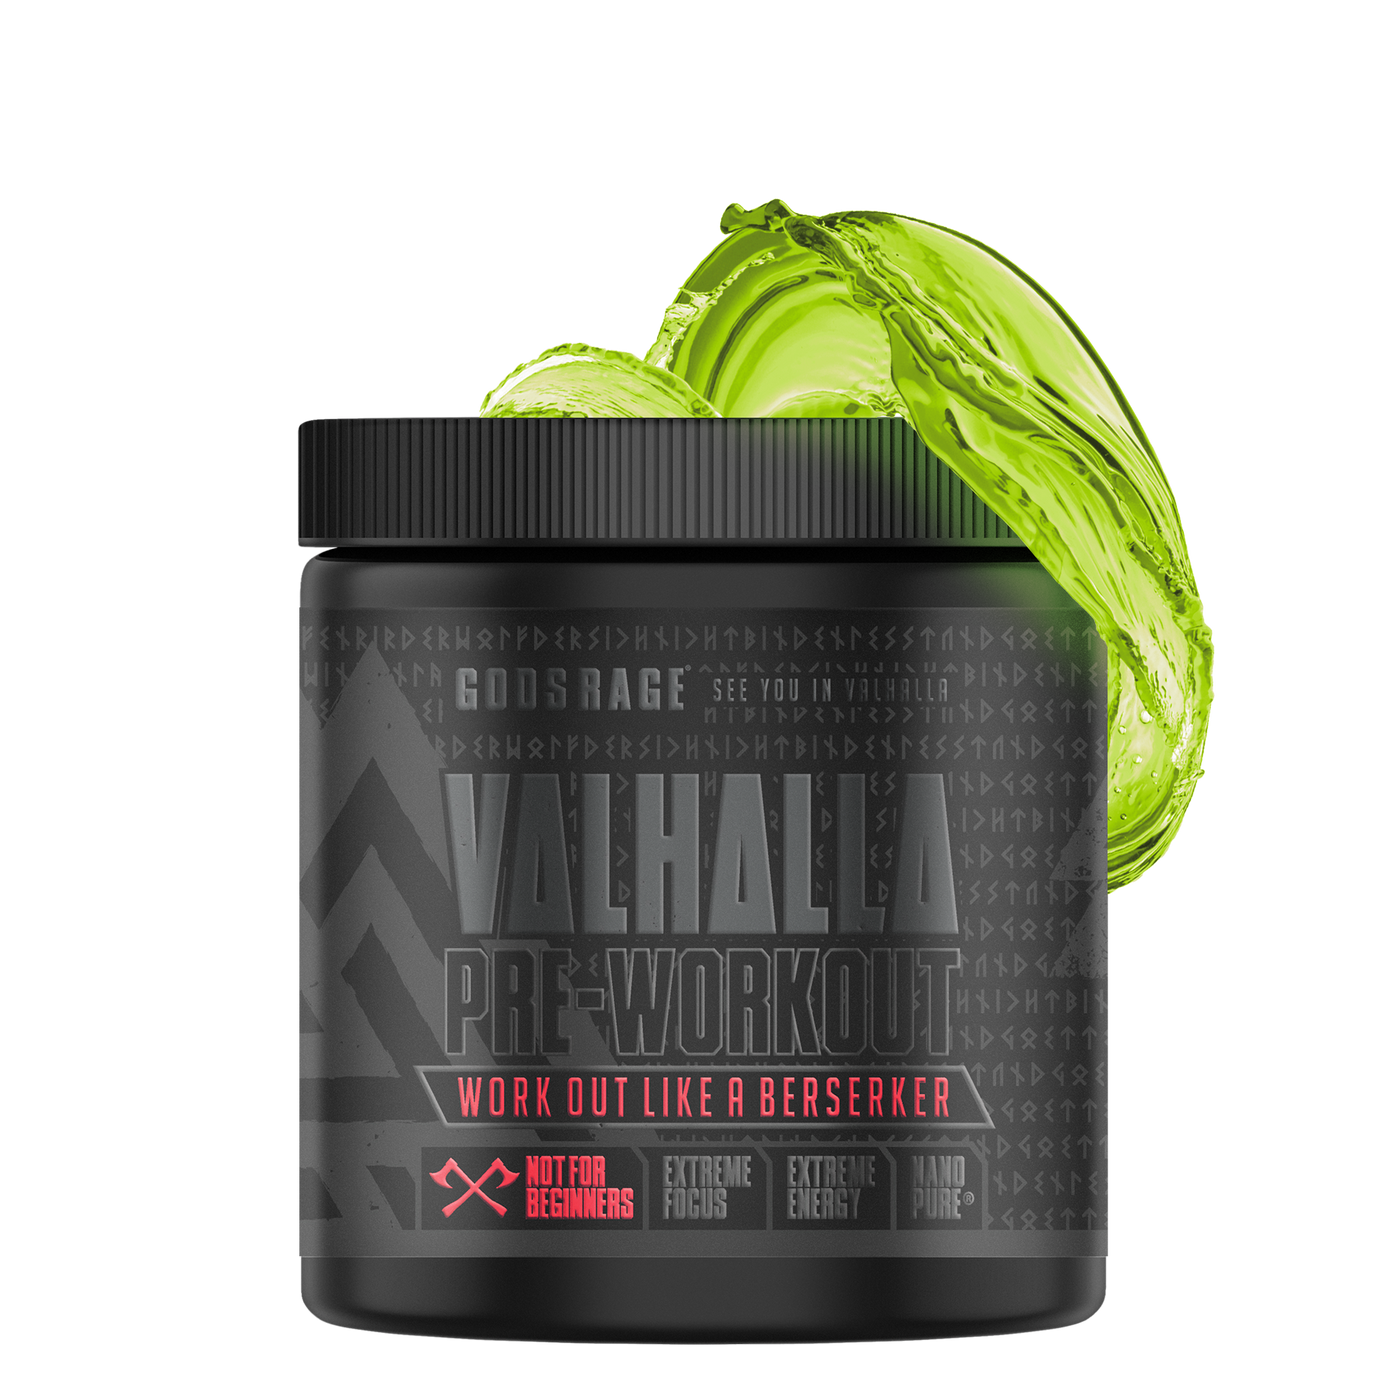 Valhalla Pre-Workout Sour Apple Rings 400g